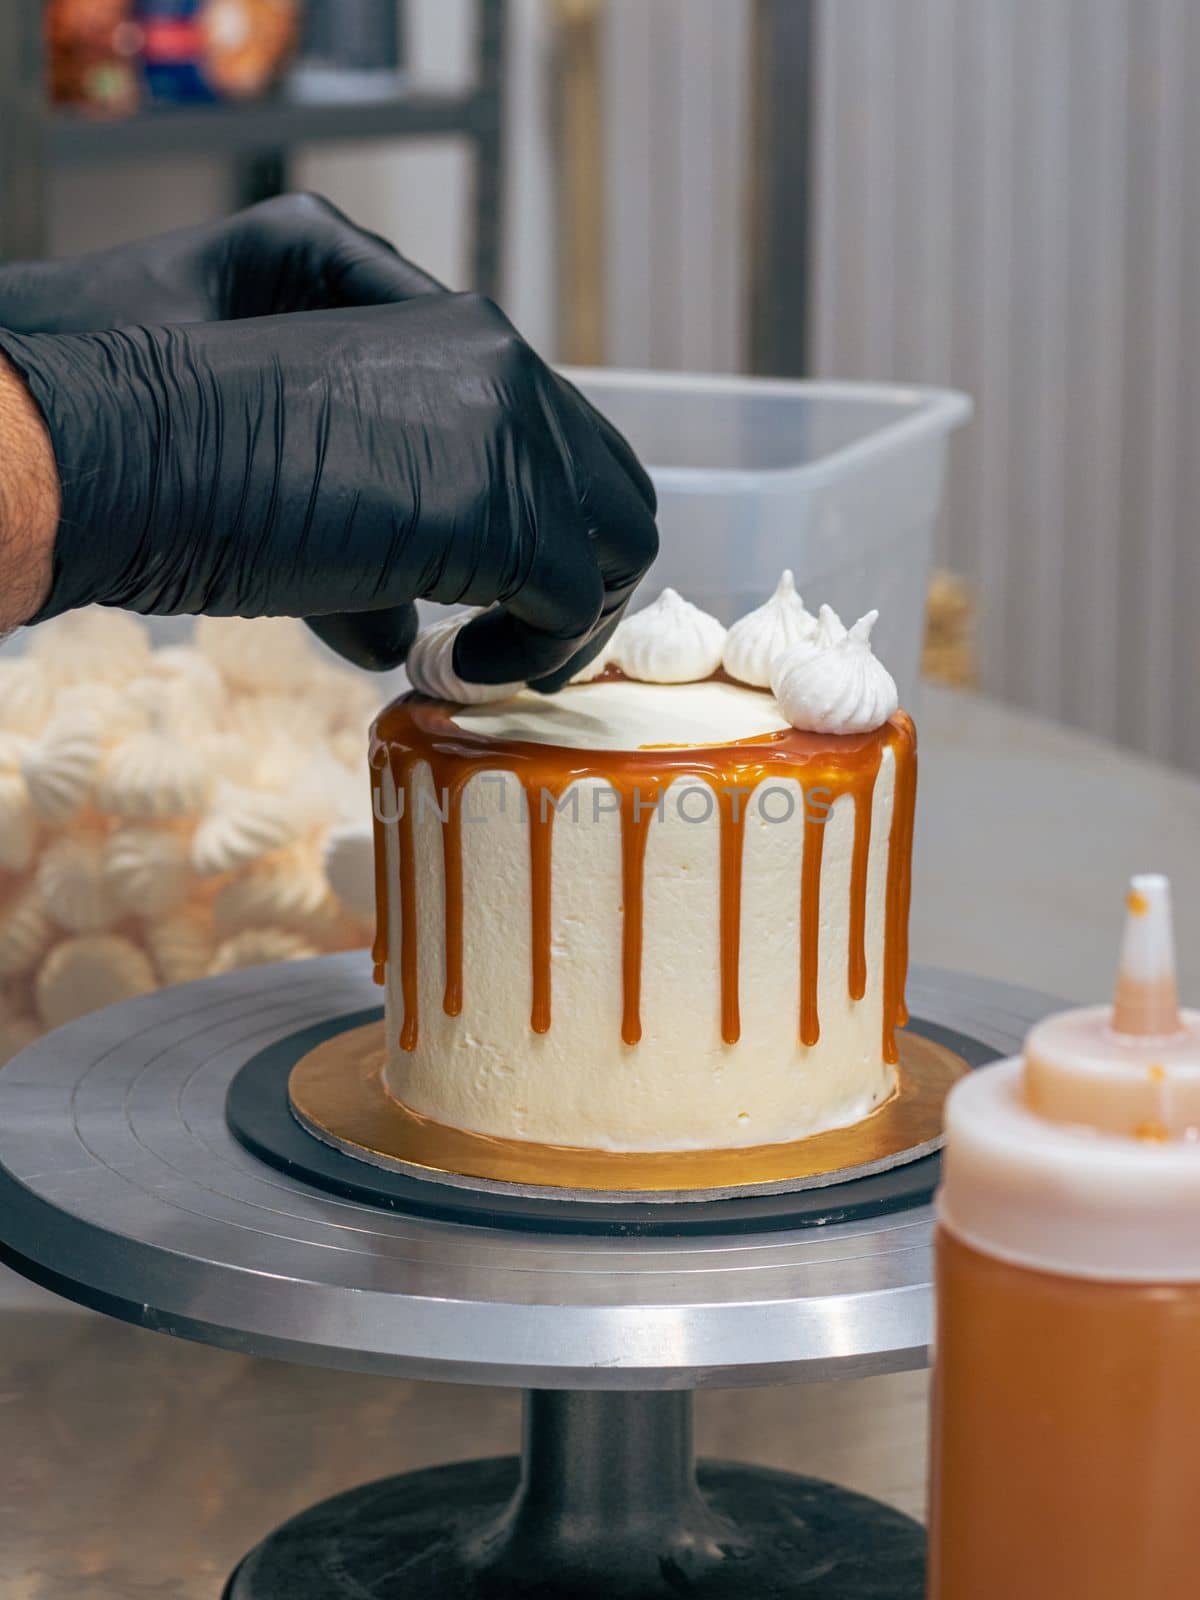 baker chef decorating cup cakes with cream and salty caramel using black gloves by verbano